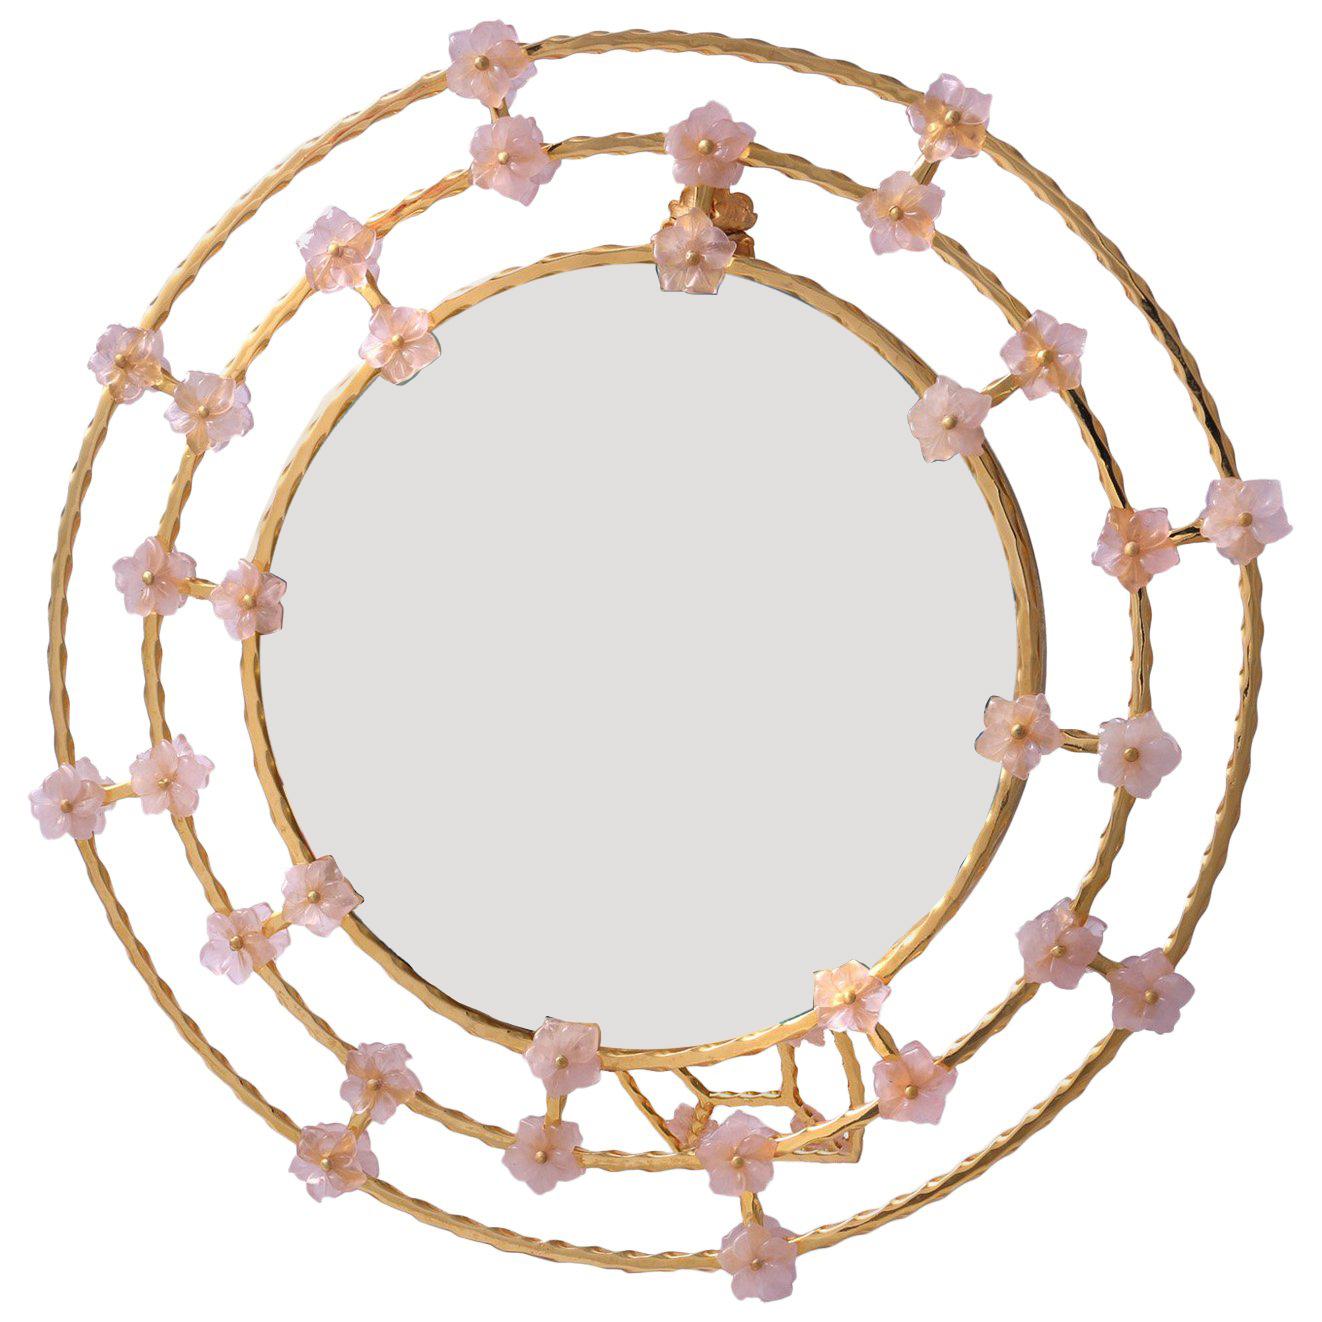 Silver Picture Frame with Pink Quartz Flowers, Gratitude Round